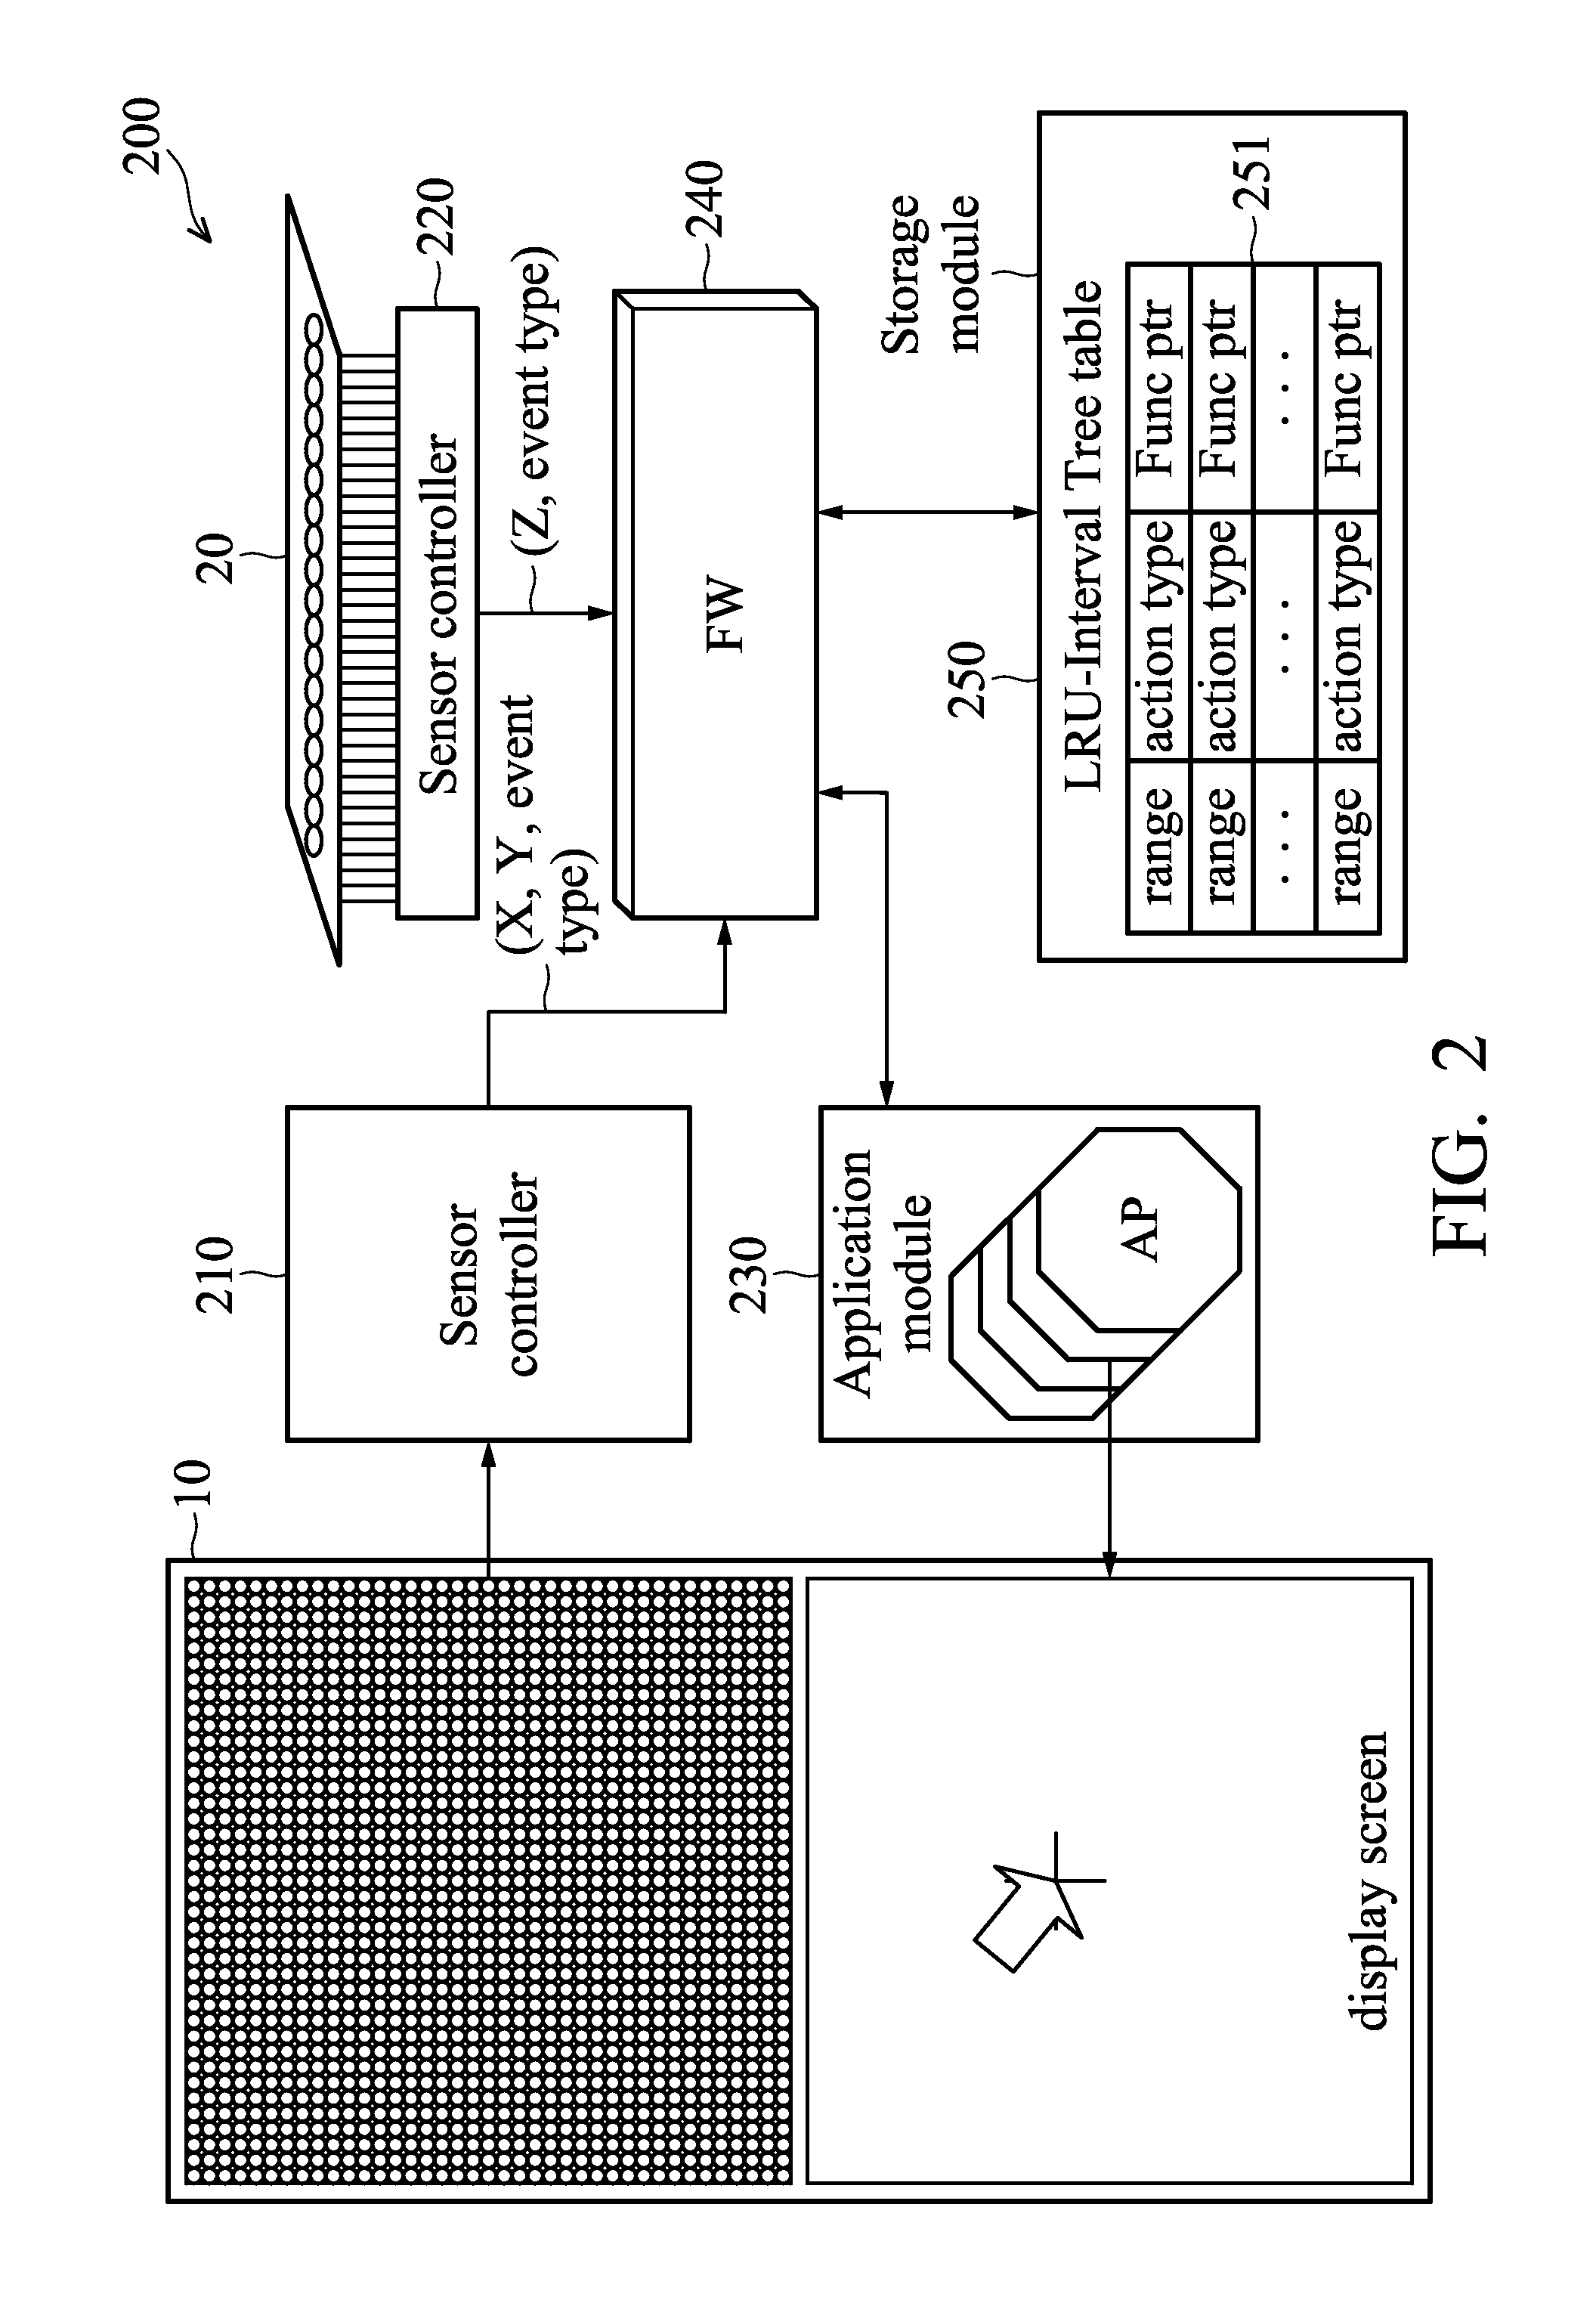 Apparatus and method for providing side touch panel as part of man-machine interface (MMI)